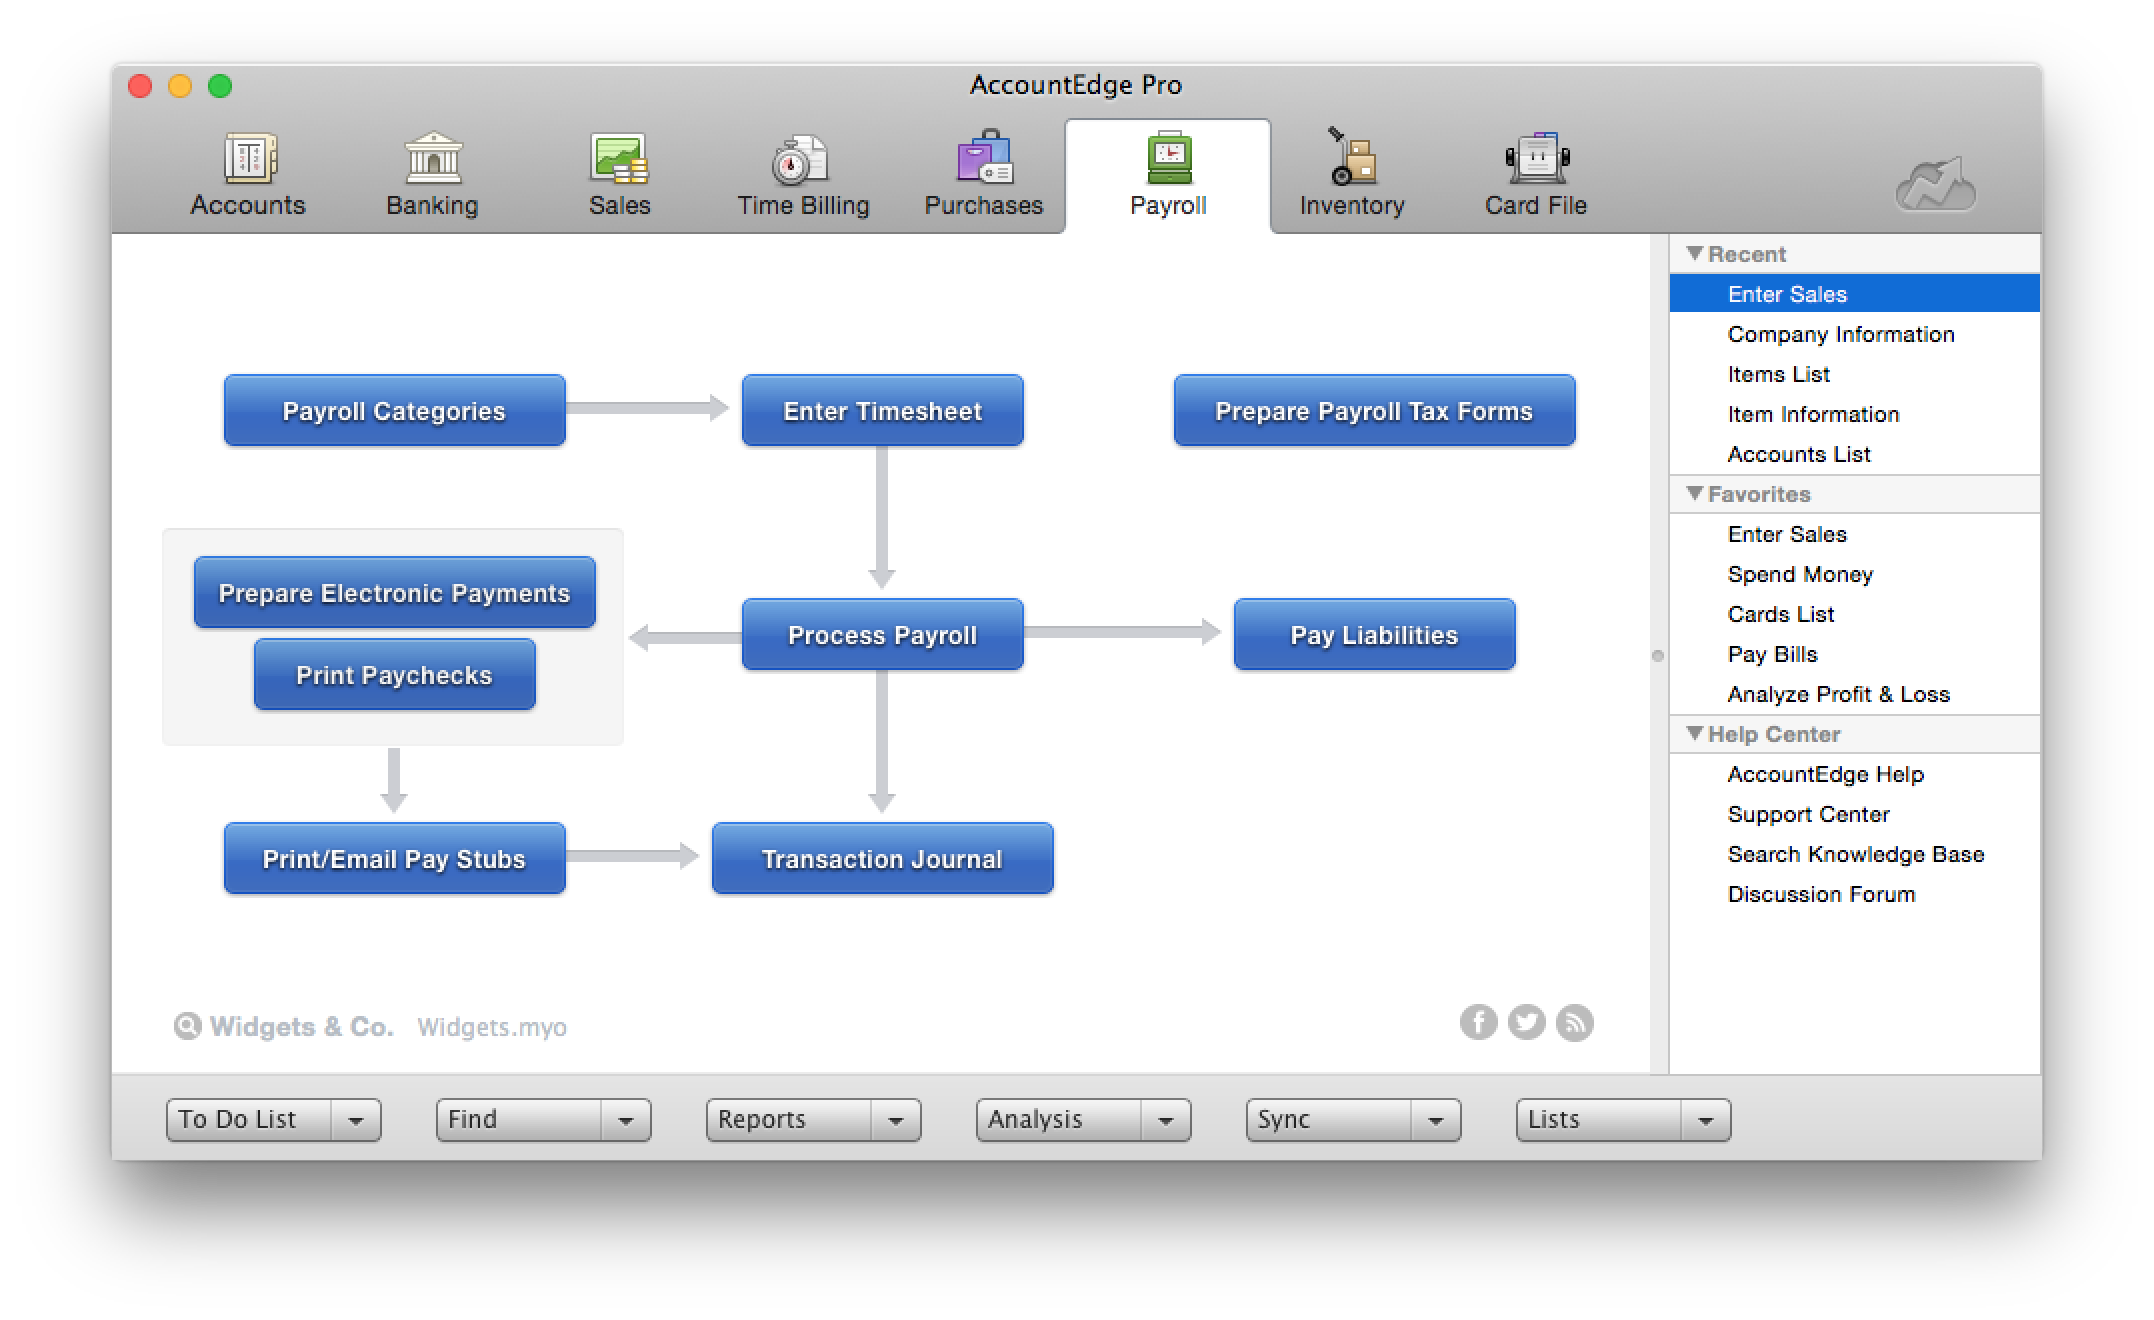 accountedge for mac review